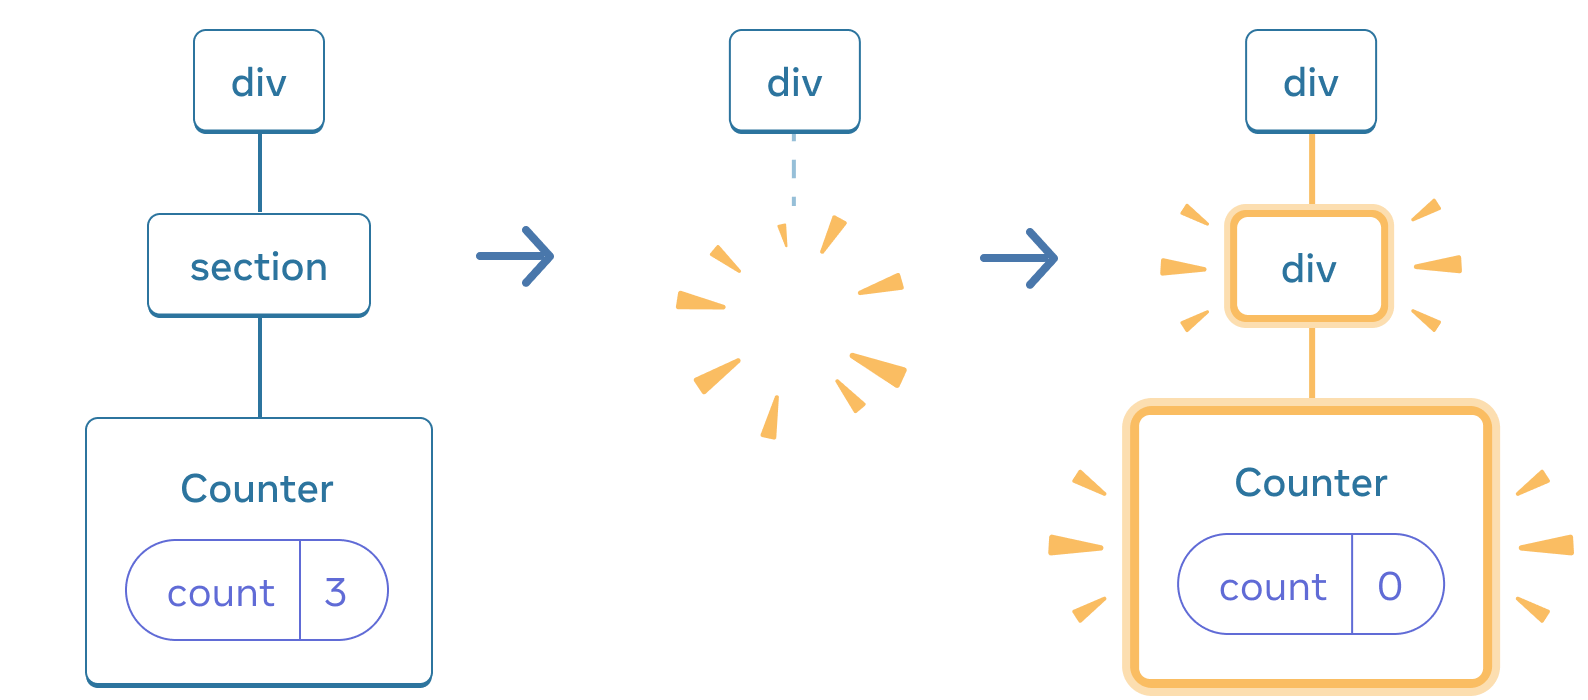 Diagram with three sections, with an arrow transitioning each section in between. The first section contains a React component labeled 'div' with a single child labeled 'section', which has a single child labeled 'Counter' containing a state bubble labeled 'count' with value 3. The middle section has the same 'div' parent, but the child components have now been deleted, indicated by a yellow 'proof' image. The third section has the same 'div' parent again, now with a new child labeled 'div', highlighted in yellow, also with a new child labeled 'Counter' containing a state bubble labeled 'count' with value 0, all highlighted in yellow.